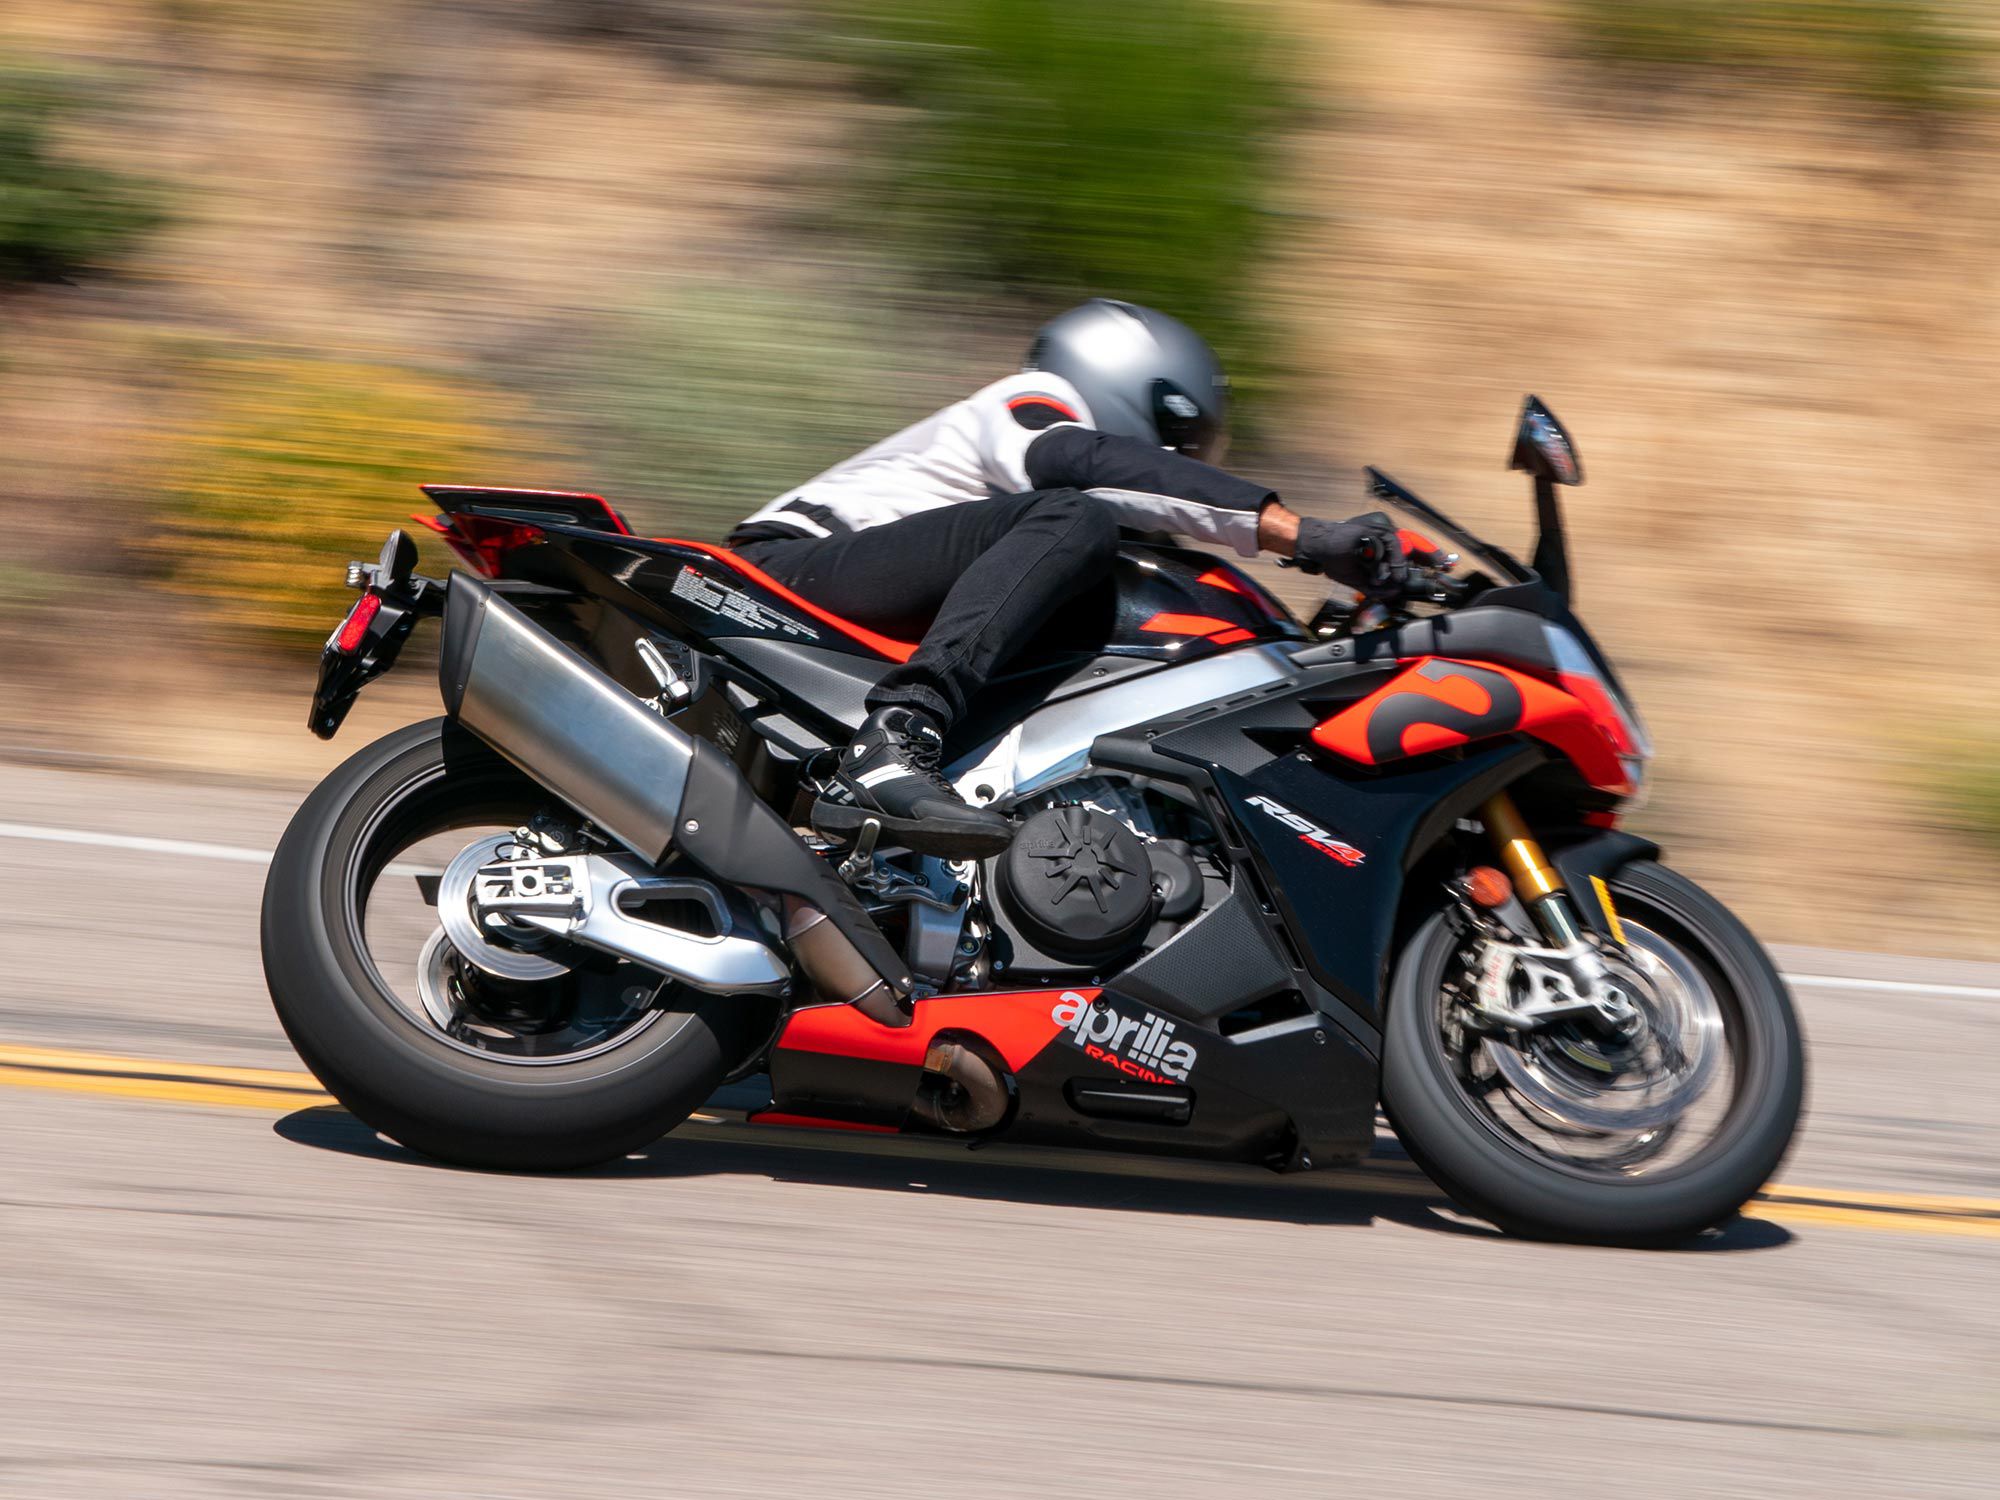 We continue to be impressed with the RSV4’s above average agility despite its 445-pound curb weight.